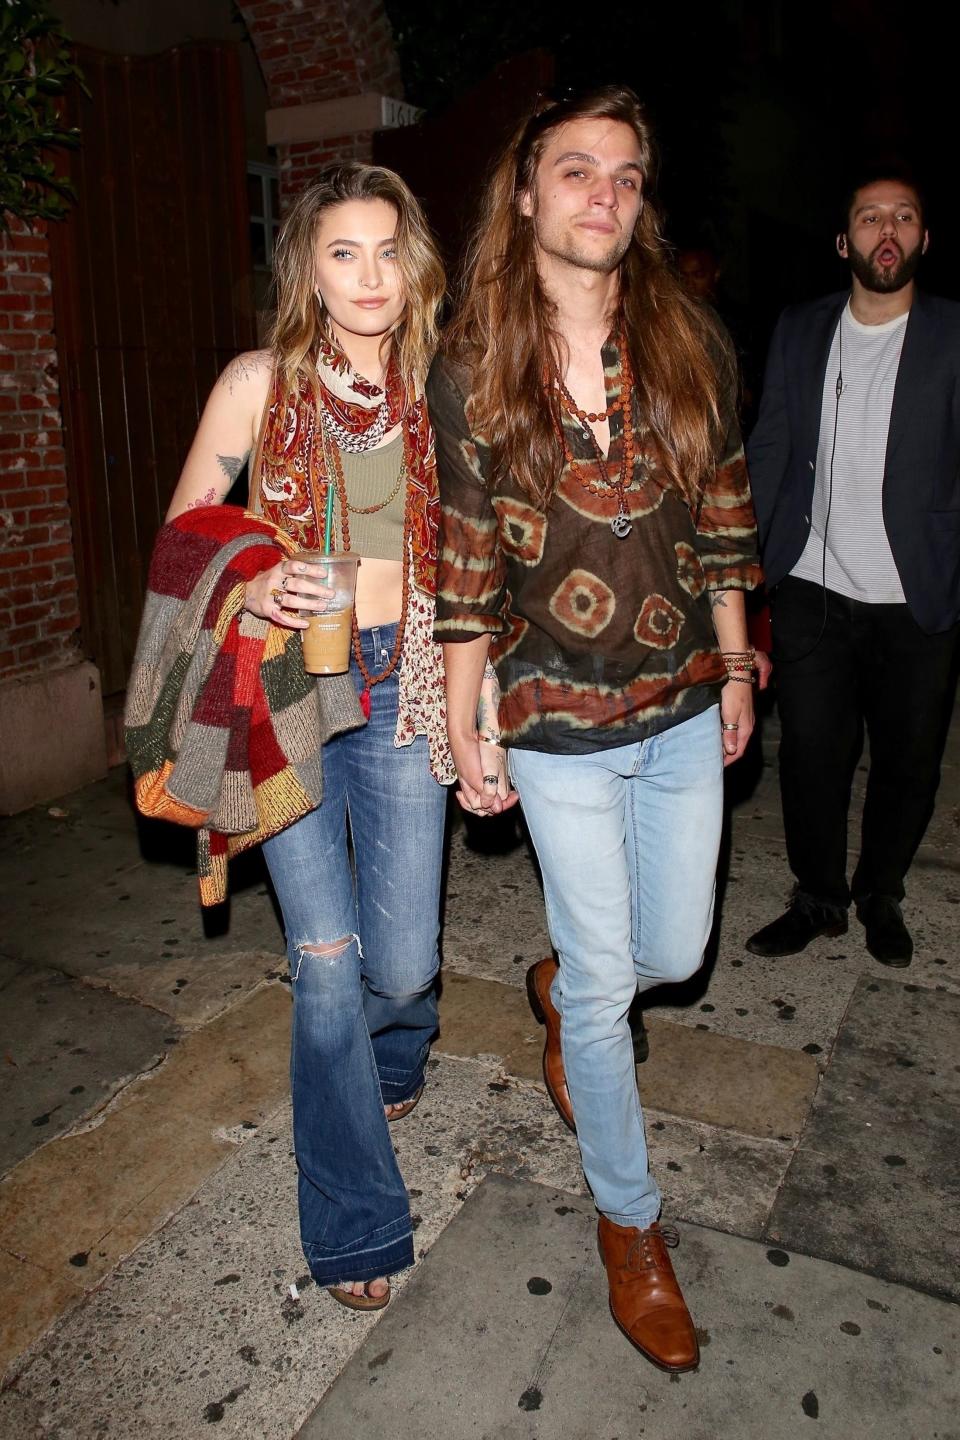 <h1 class="title">Paris Jackson and Gabriel Glenn head out after an acoustic performance in Hollywood</h1><cite class="credit">Photo: Backgrid</cite>